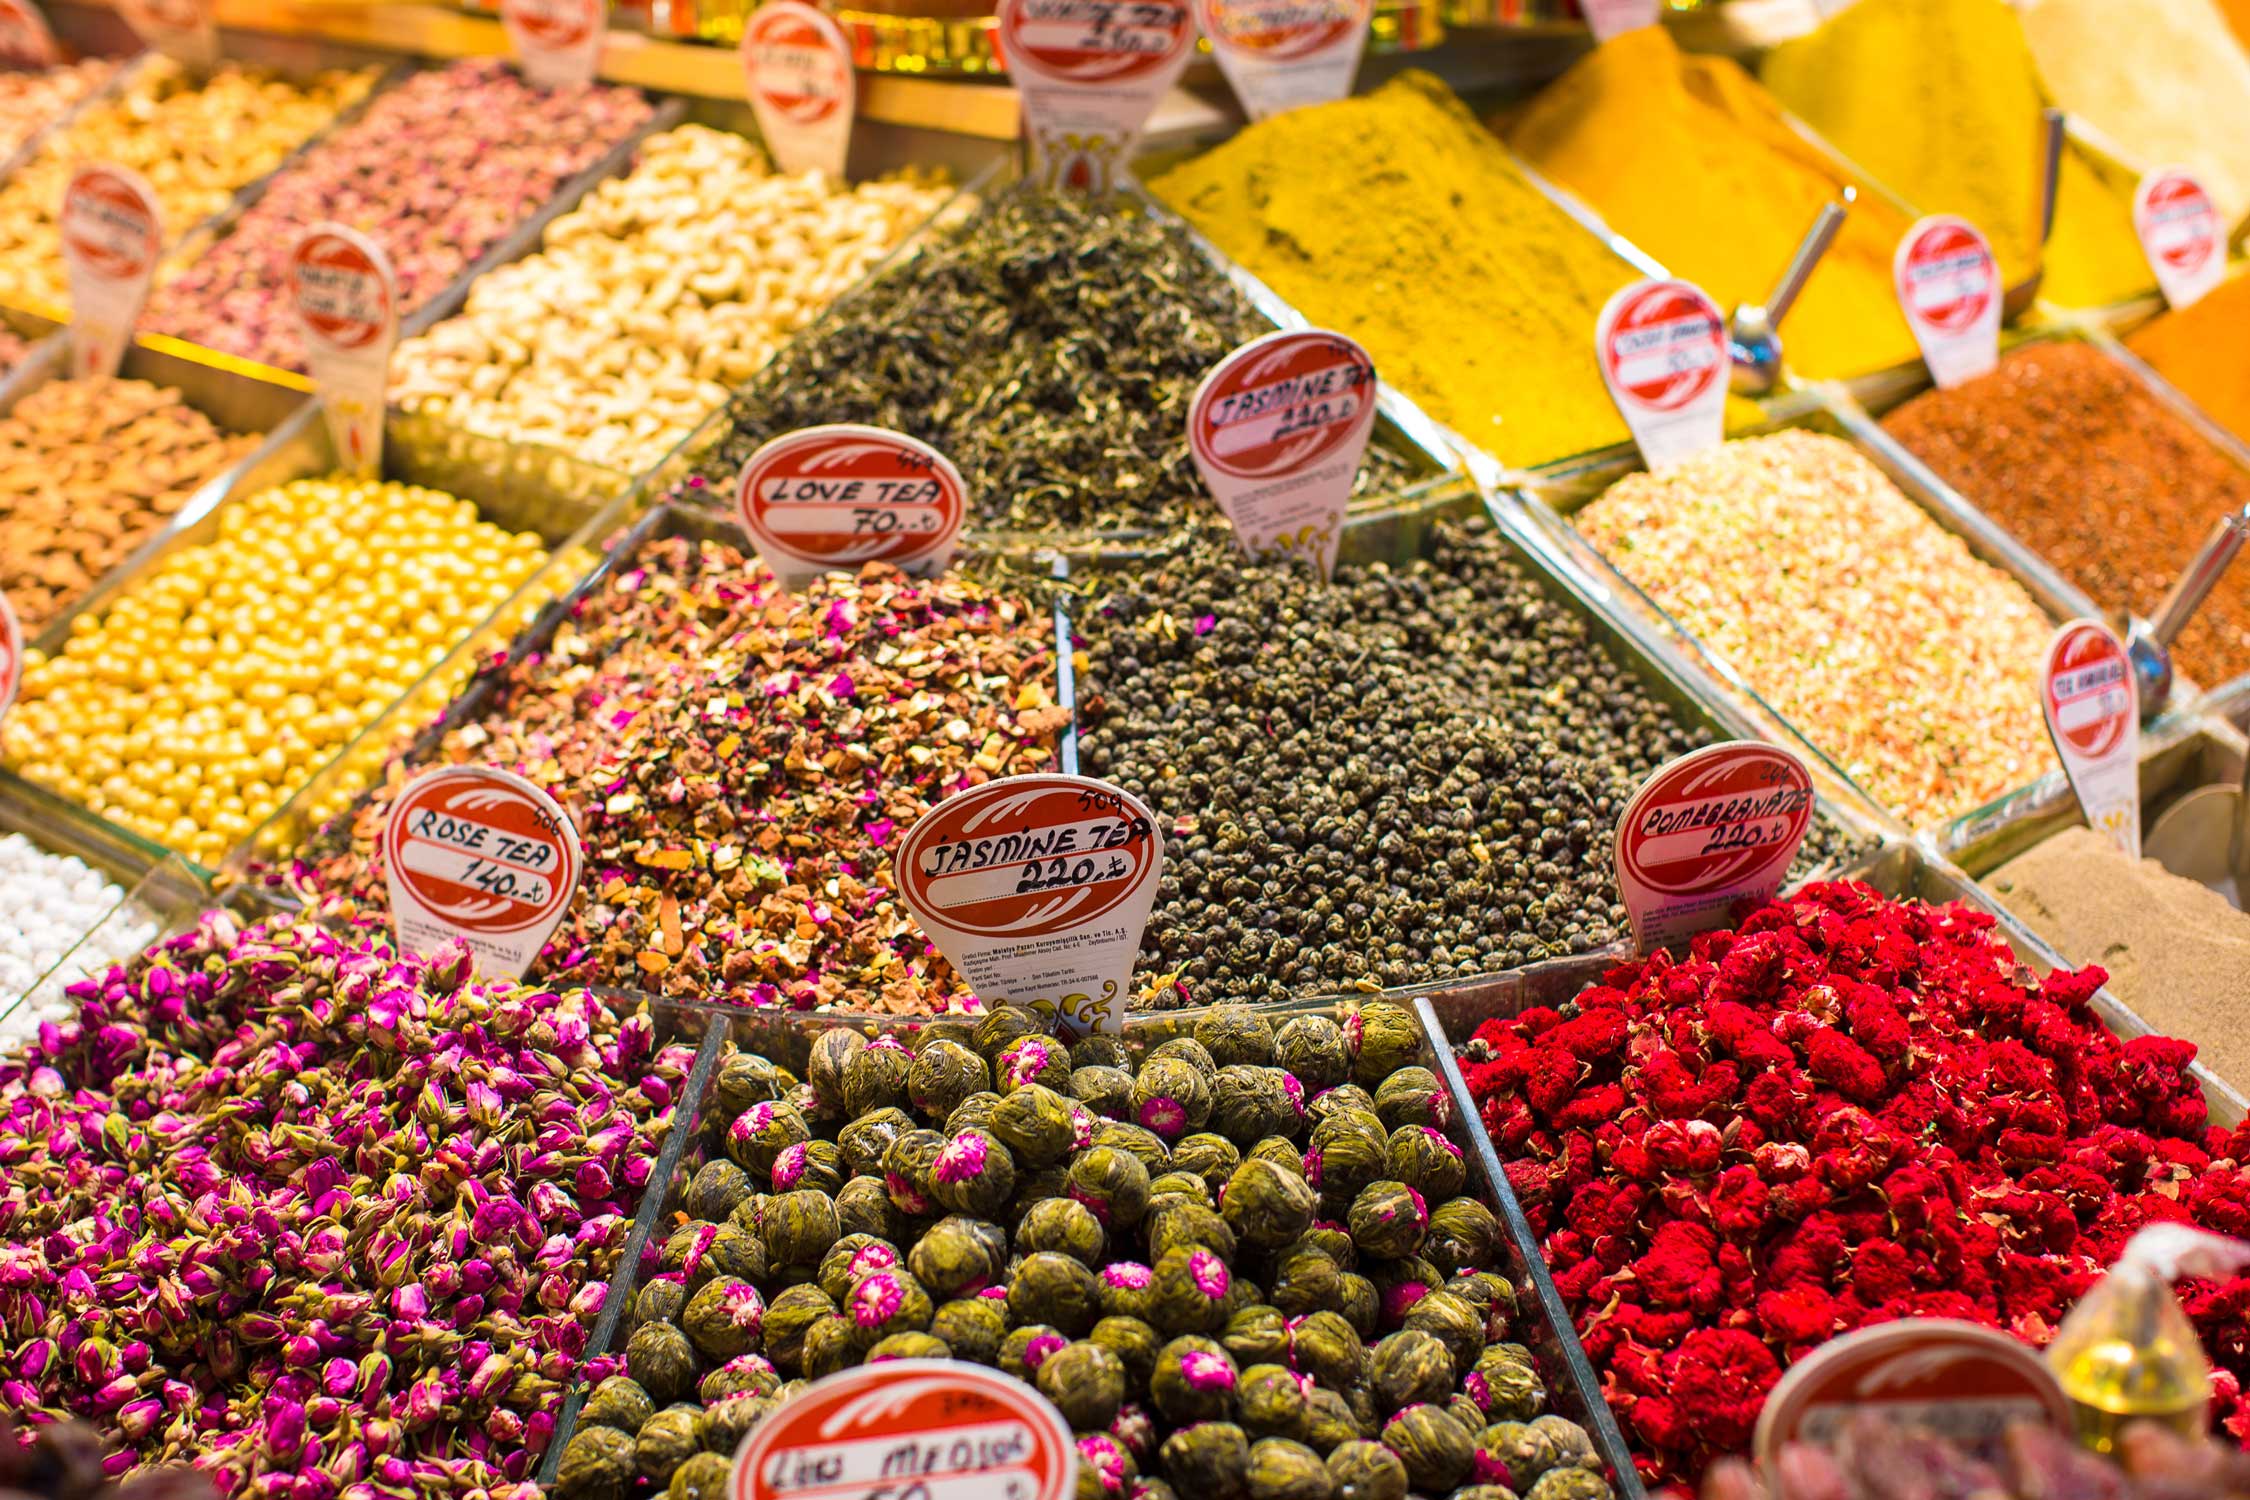 Typical spices and teas on sale in the turkish markets